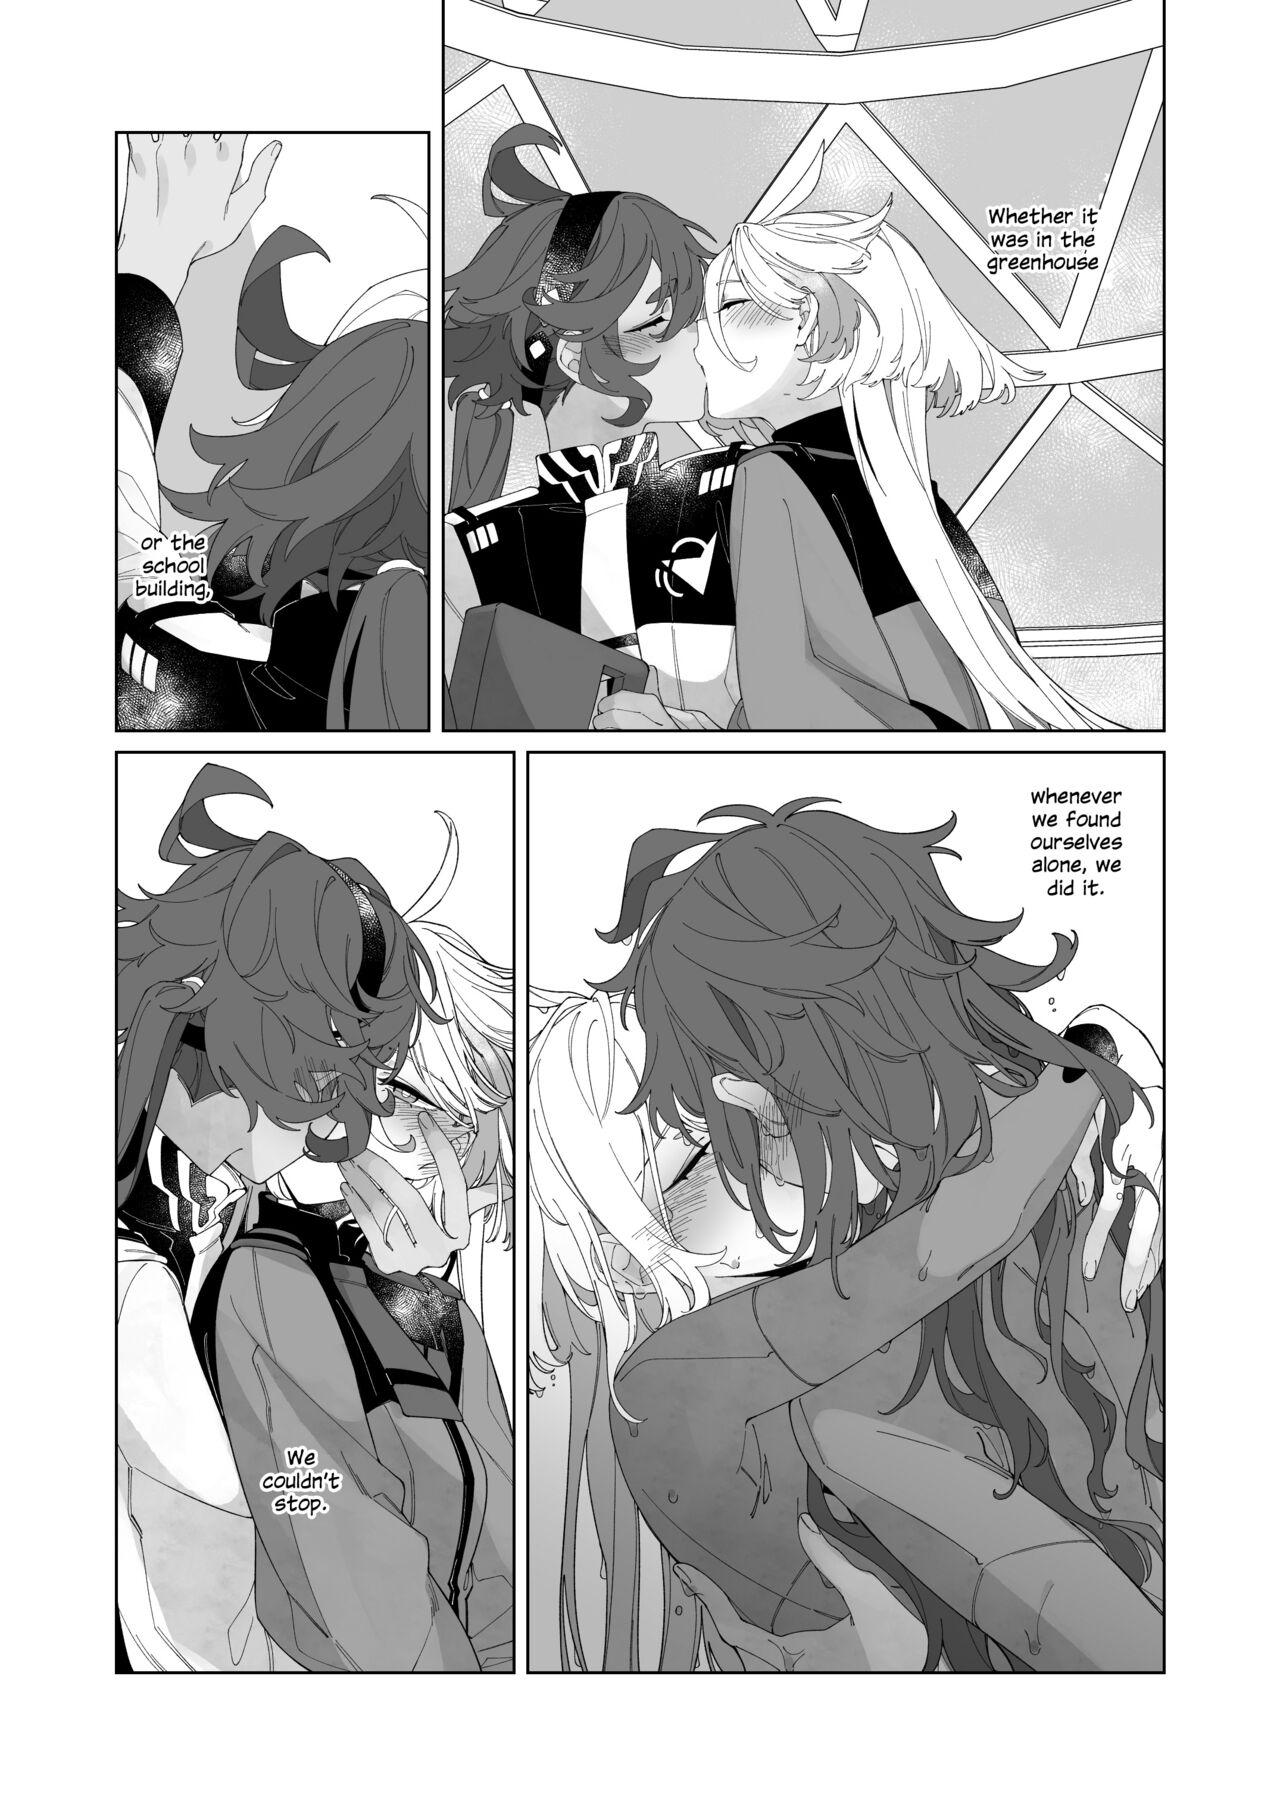 Super Kiss no Ato Nani ga Shitai? | After Kissing, What Else Do You Want to Do? - Mobile suit gundam the witch from mercury Phat - Page 8